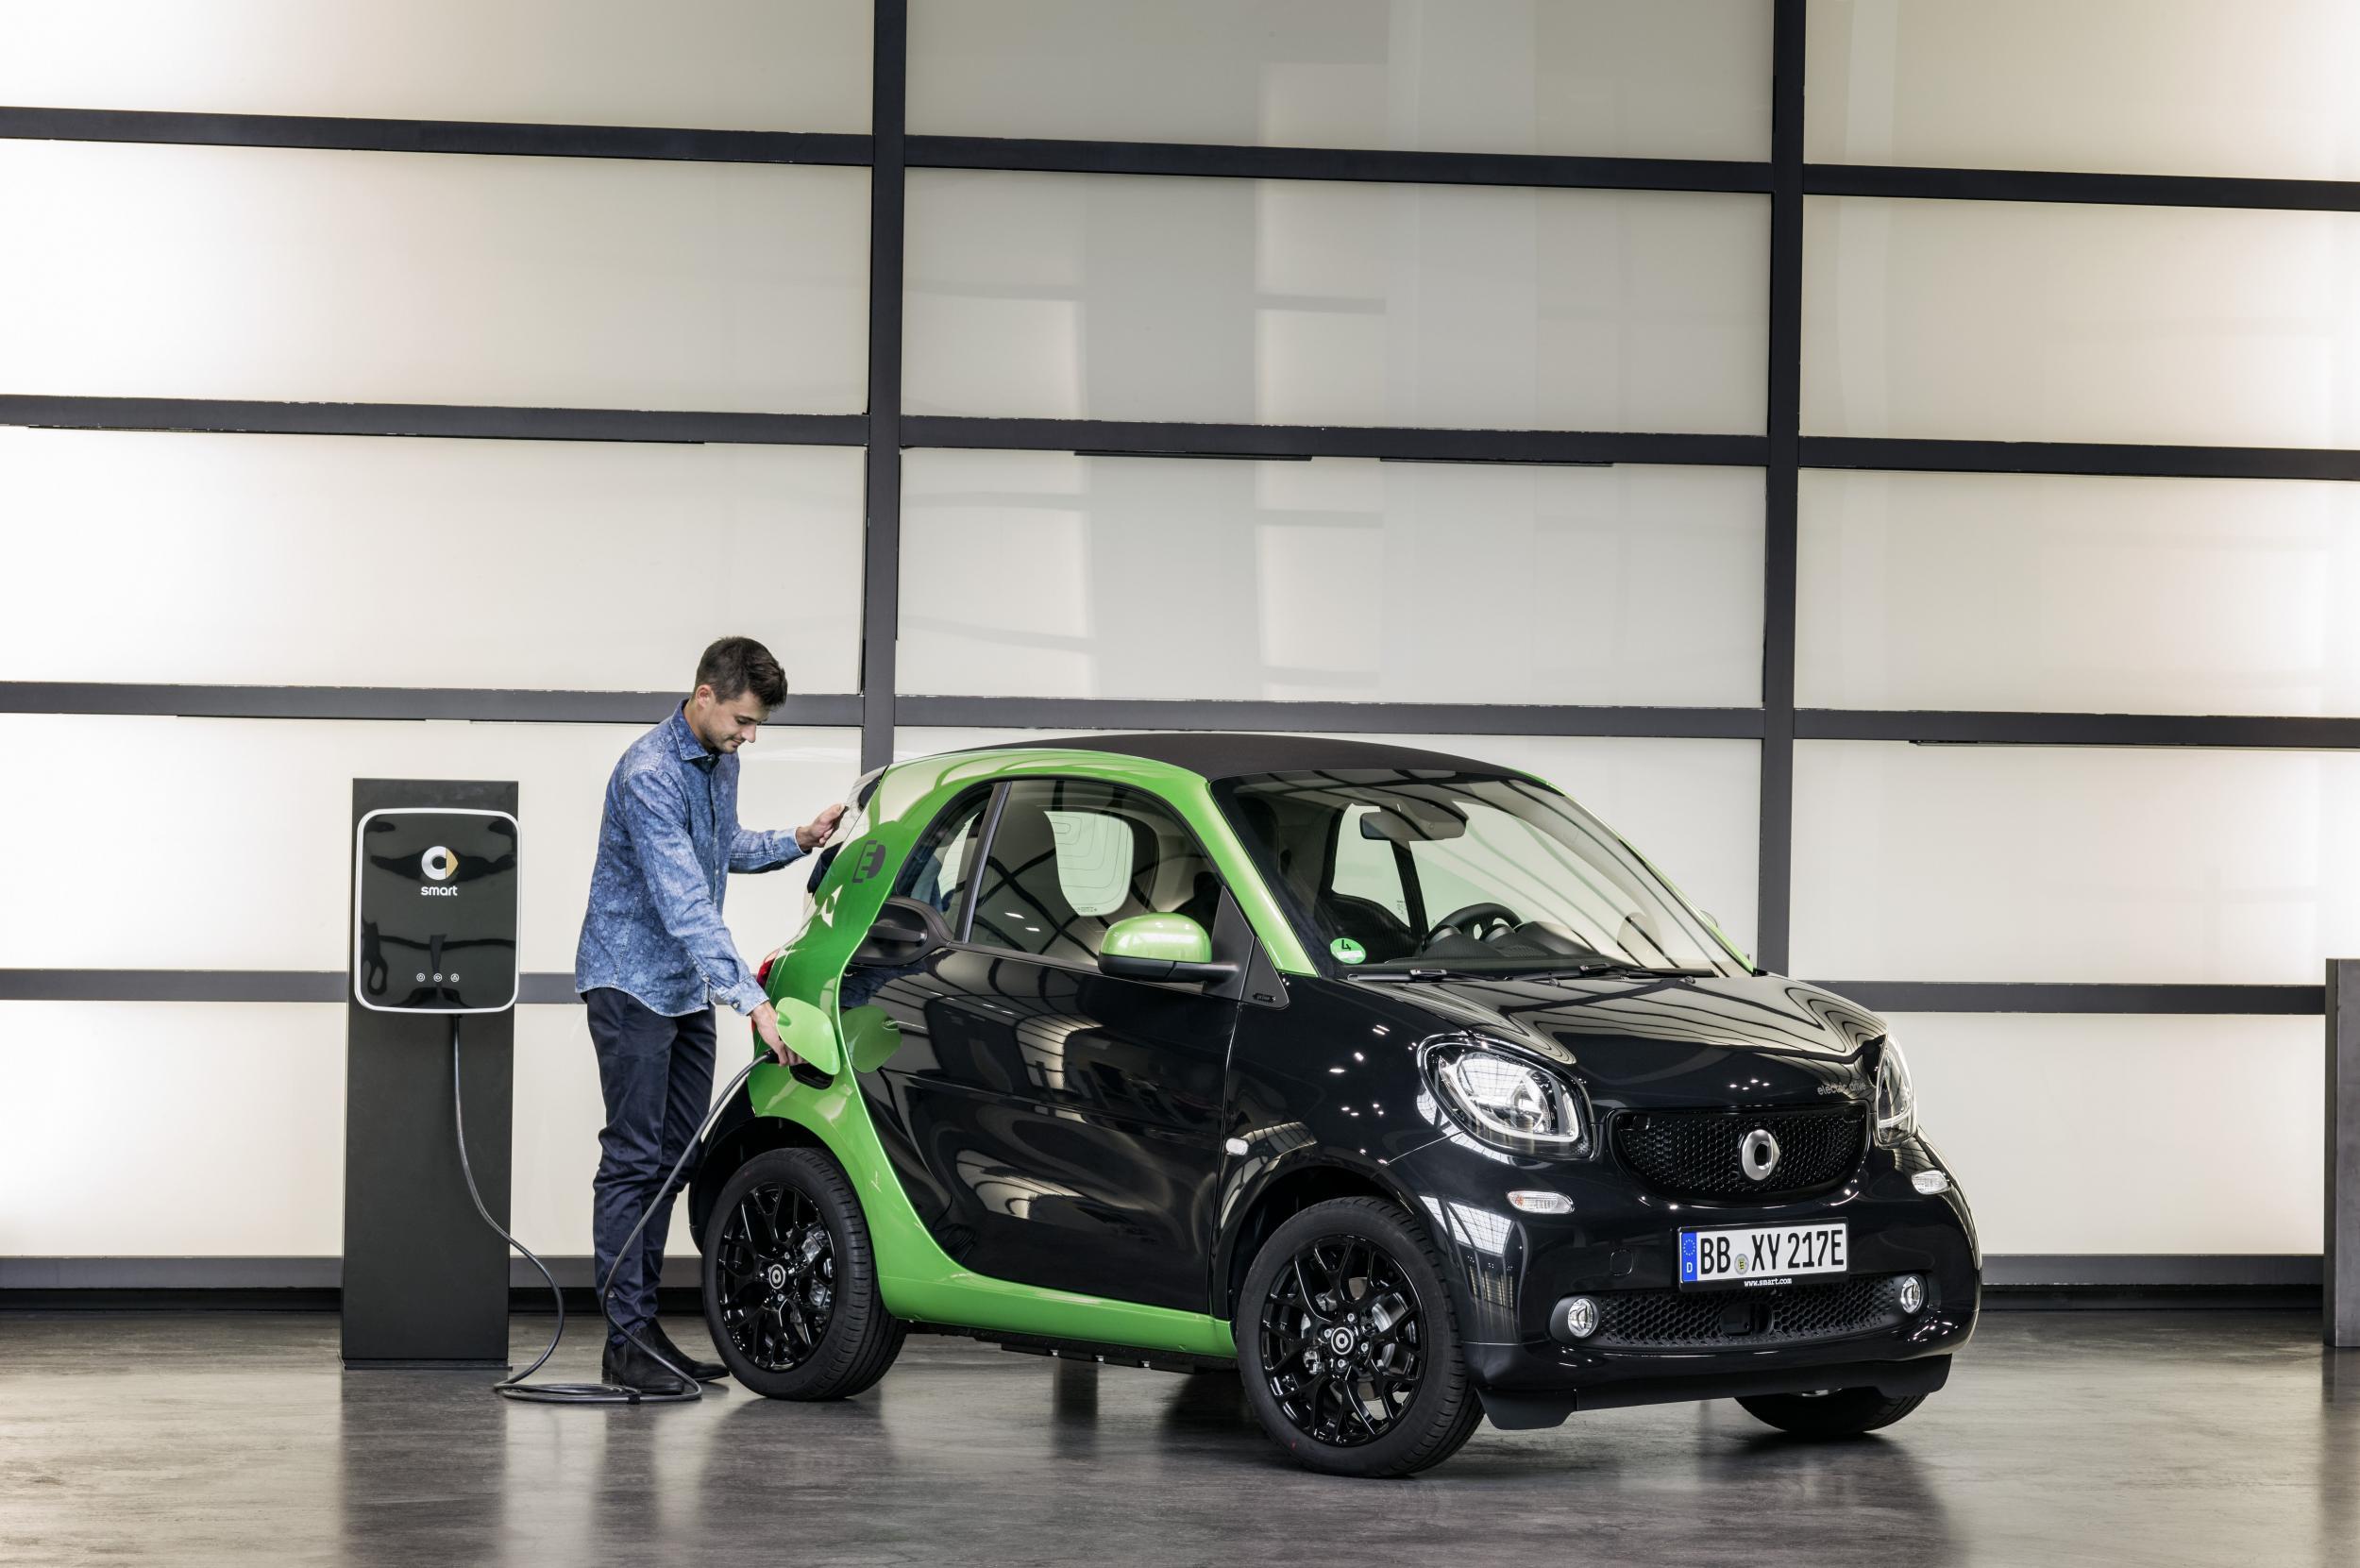 Smart is among the electric car manufacturers set to introduce new mainstream models that will be increasingly affordable